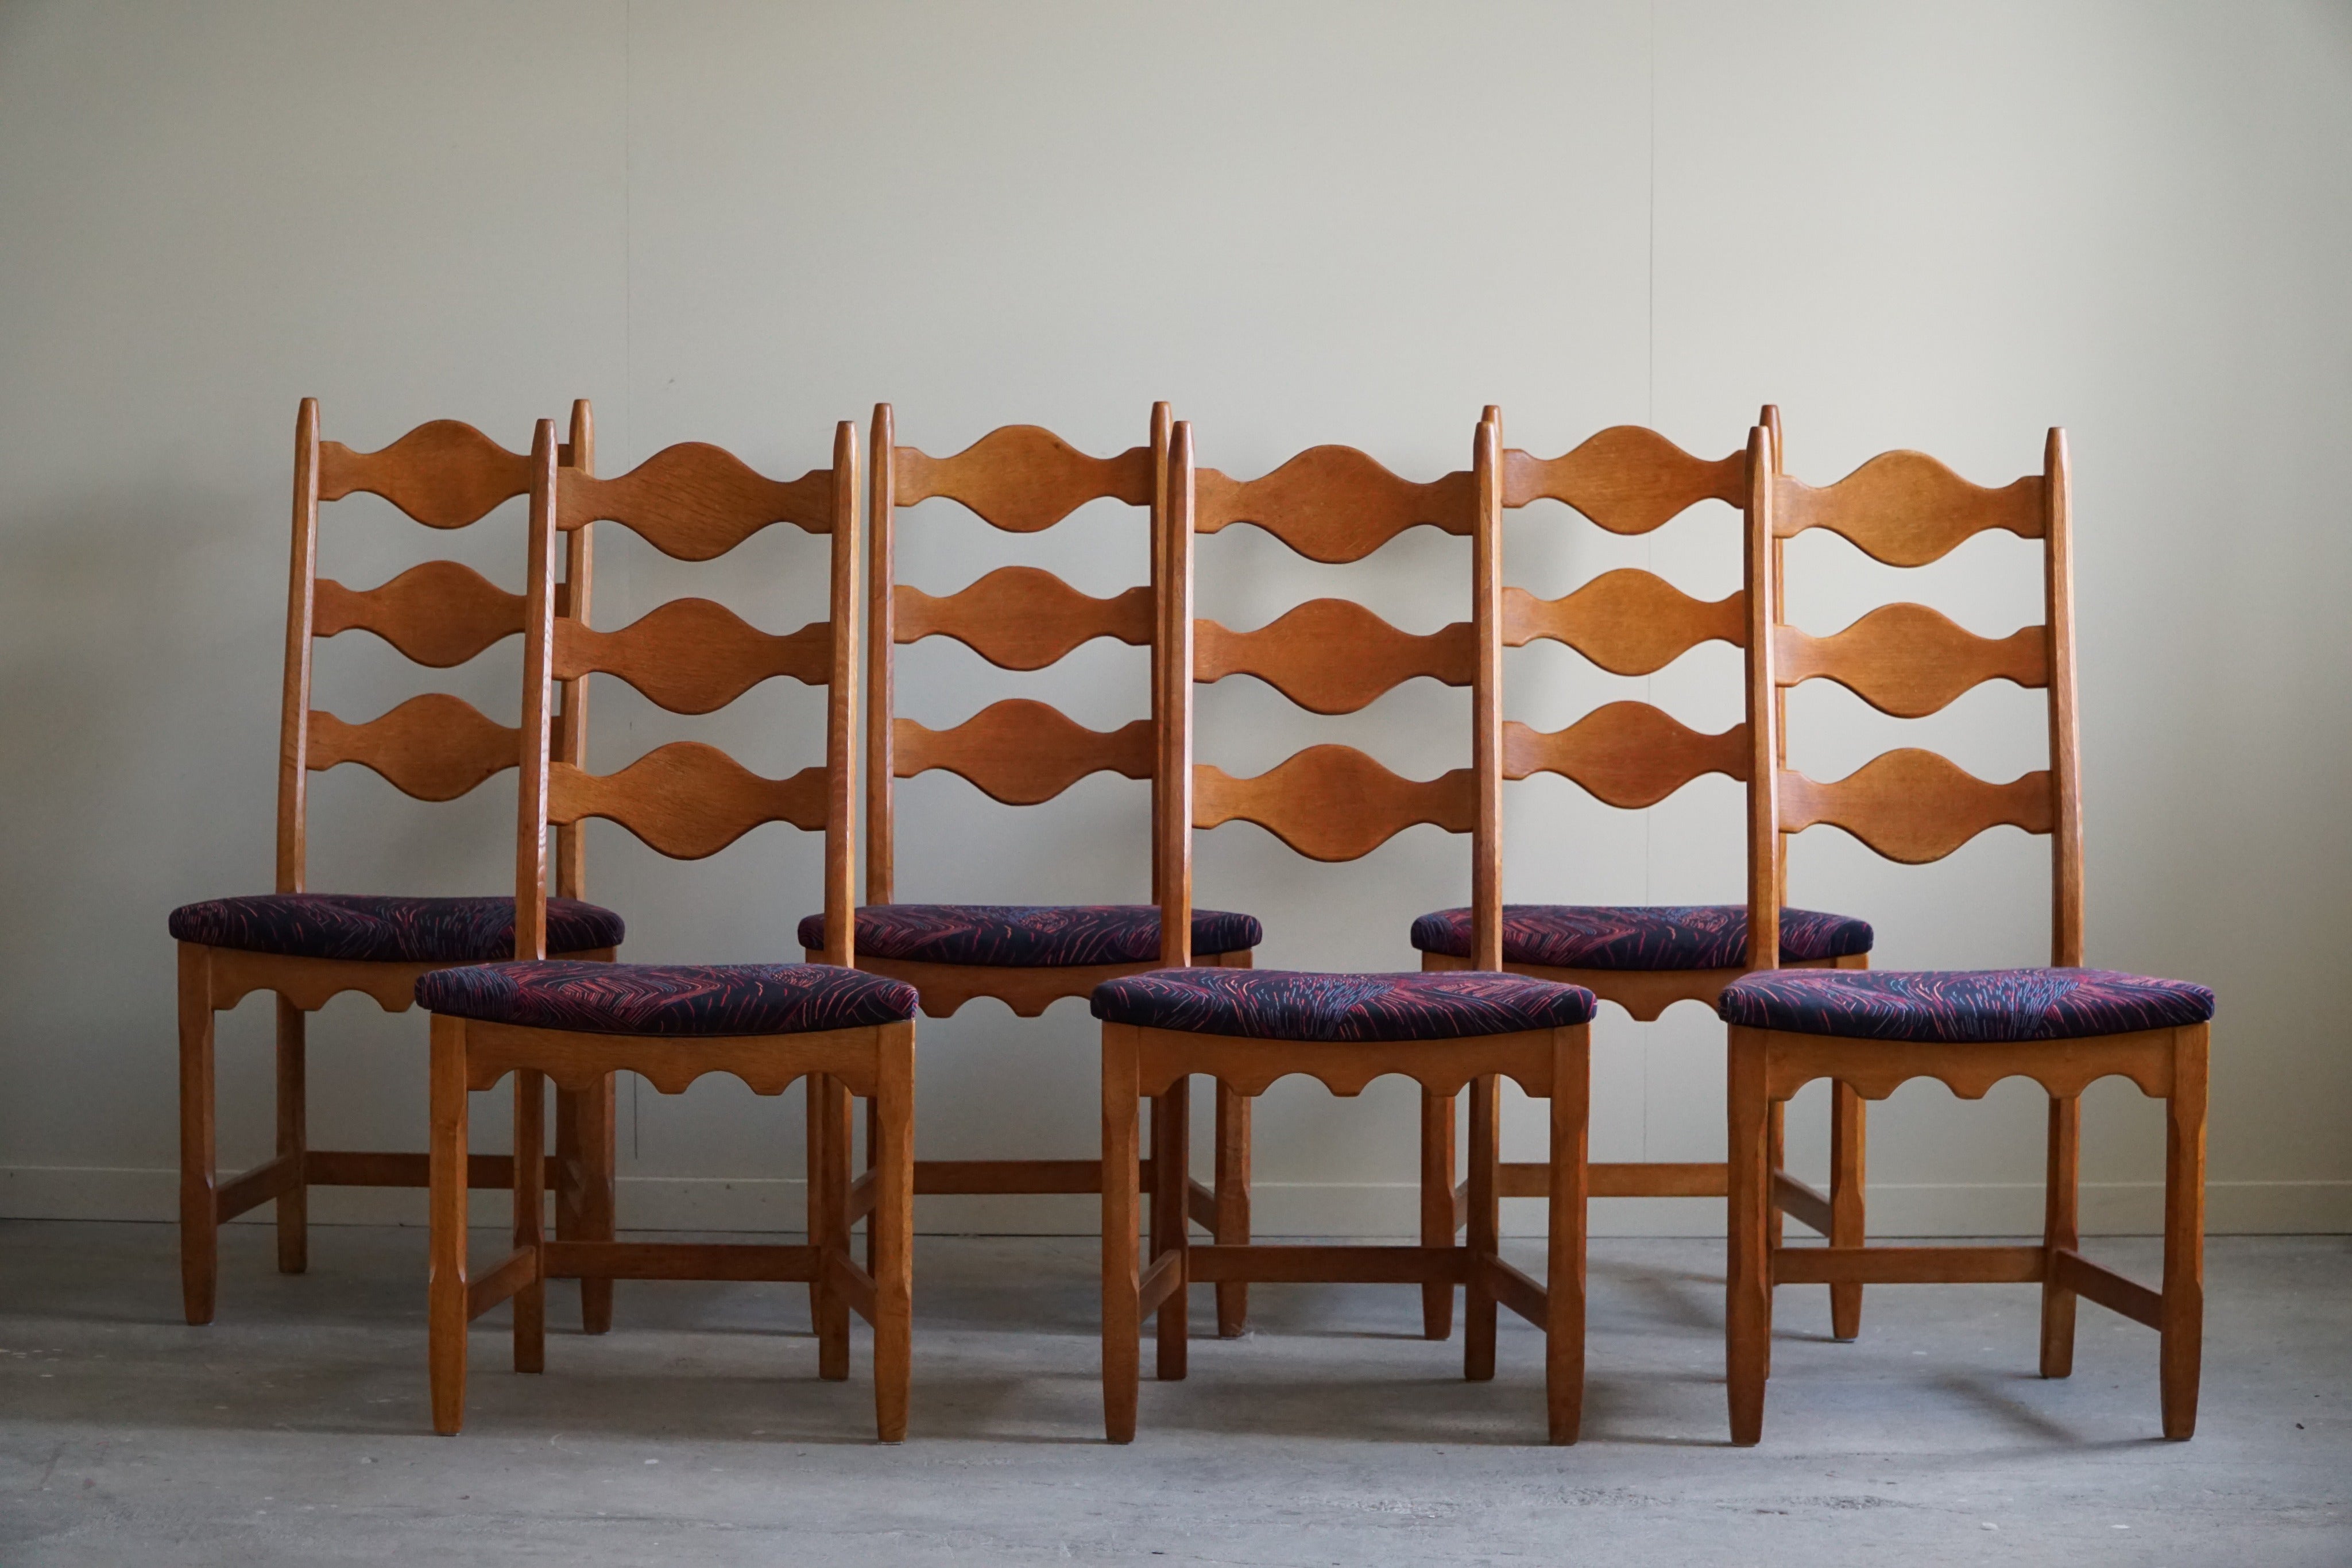 A sculptural classic set of 6 dining highback dining chairs in oak, seats reupholstered in a luxurious vintage fabric from the 1980s. Designed by Henning (Henry) Kjaernulf for Nyrup Møbelfabrik - ca 1960s. Strong references to the popular 